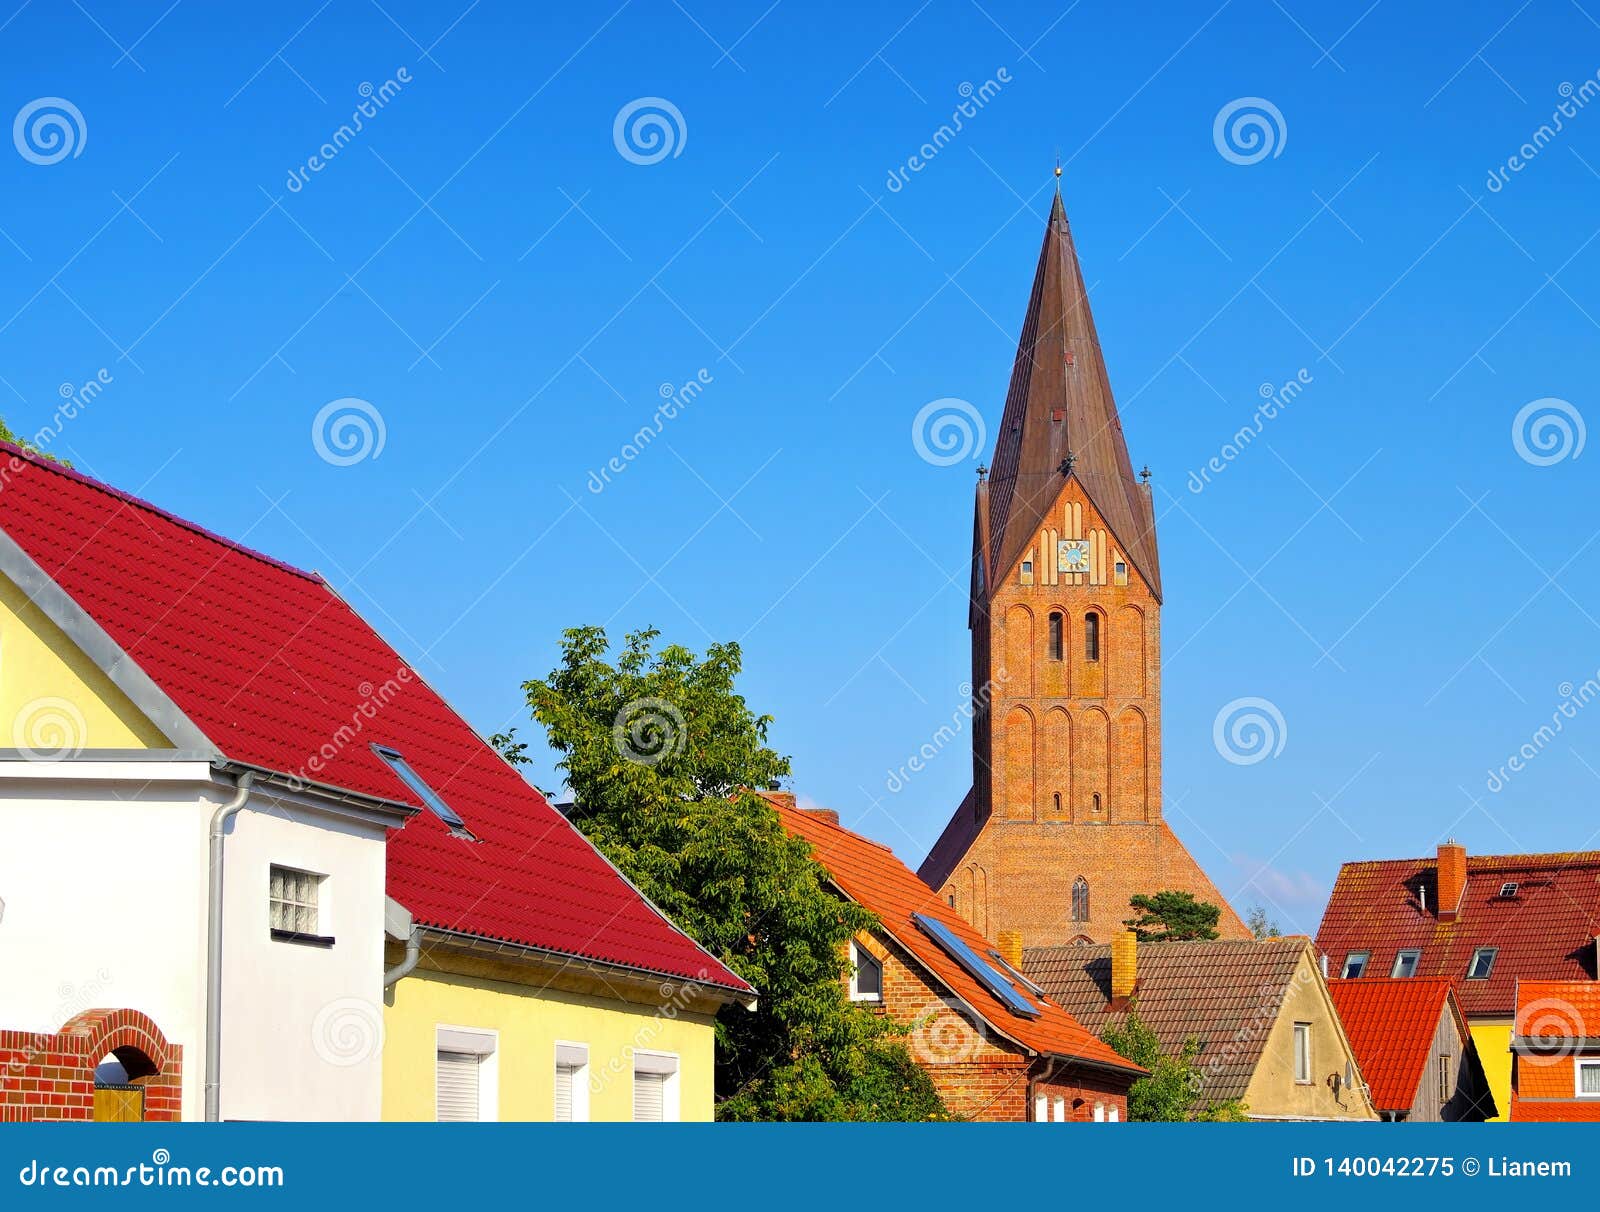 barth city and church, an old town on the bodden